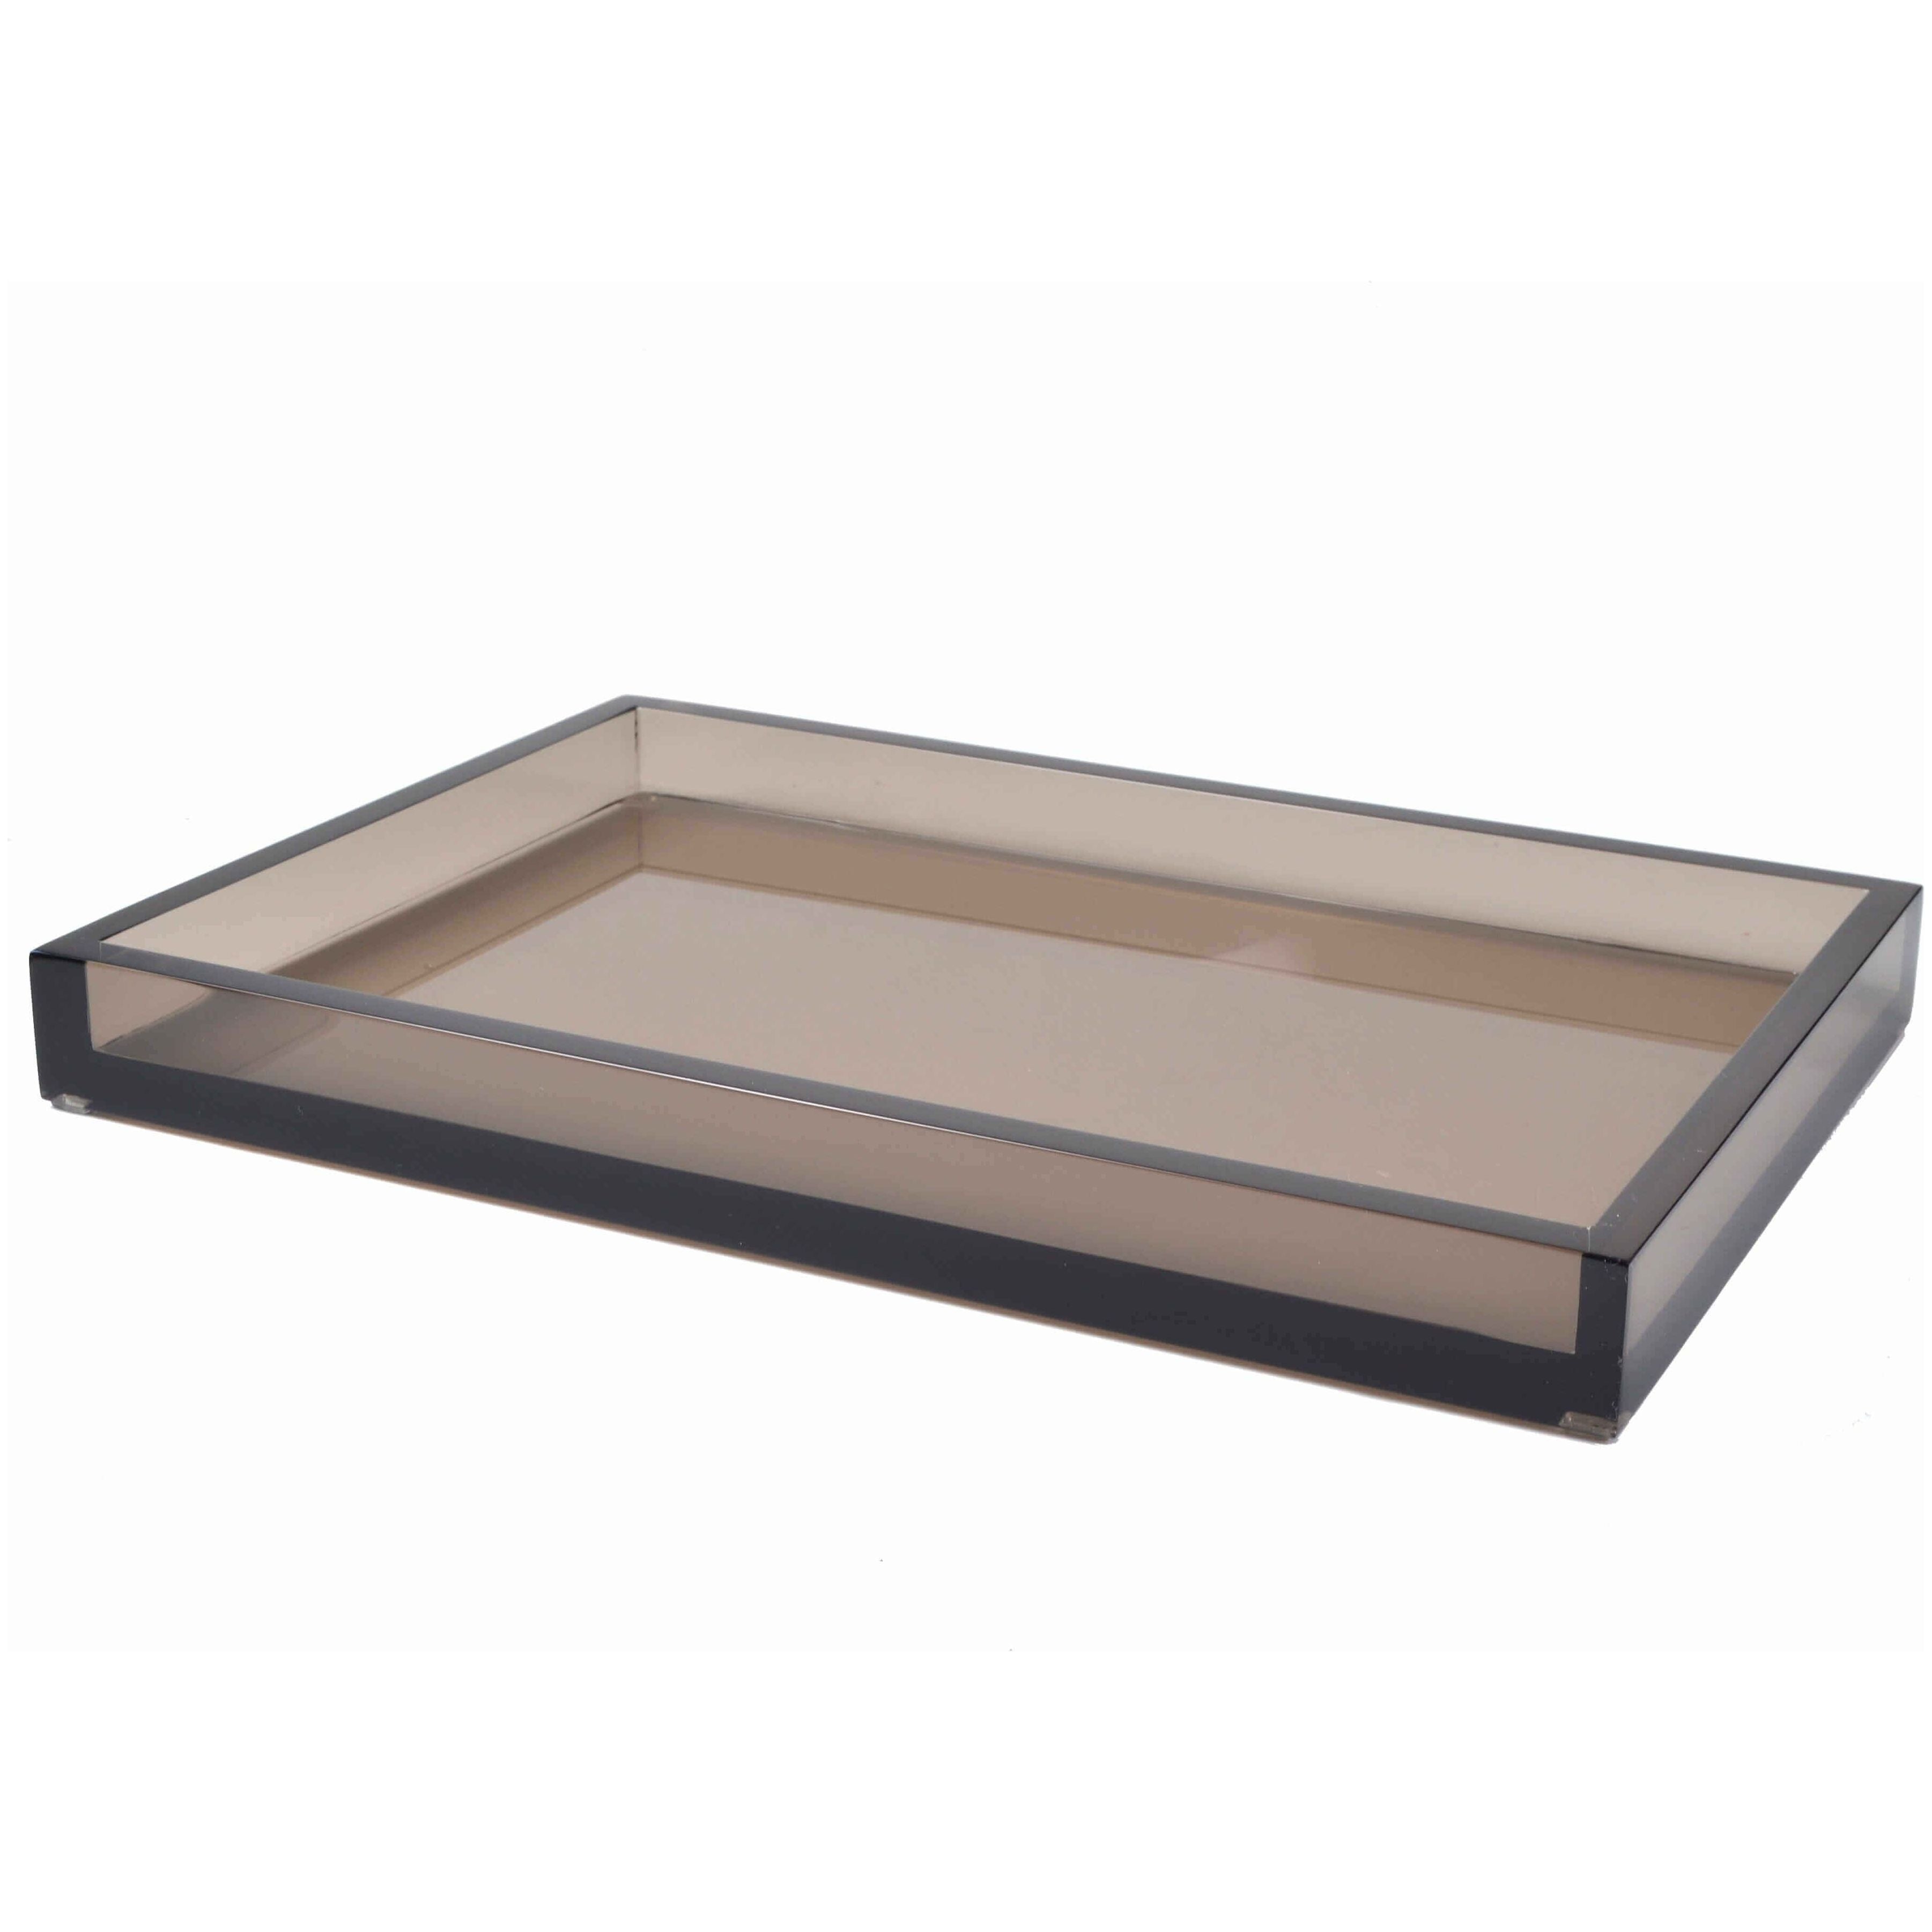 Mike + Ally - Ice Smoked Large Tray - 31217 - Brown - 